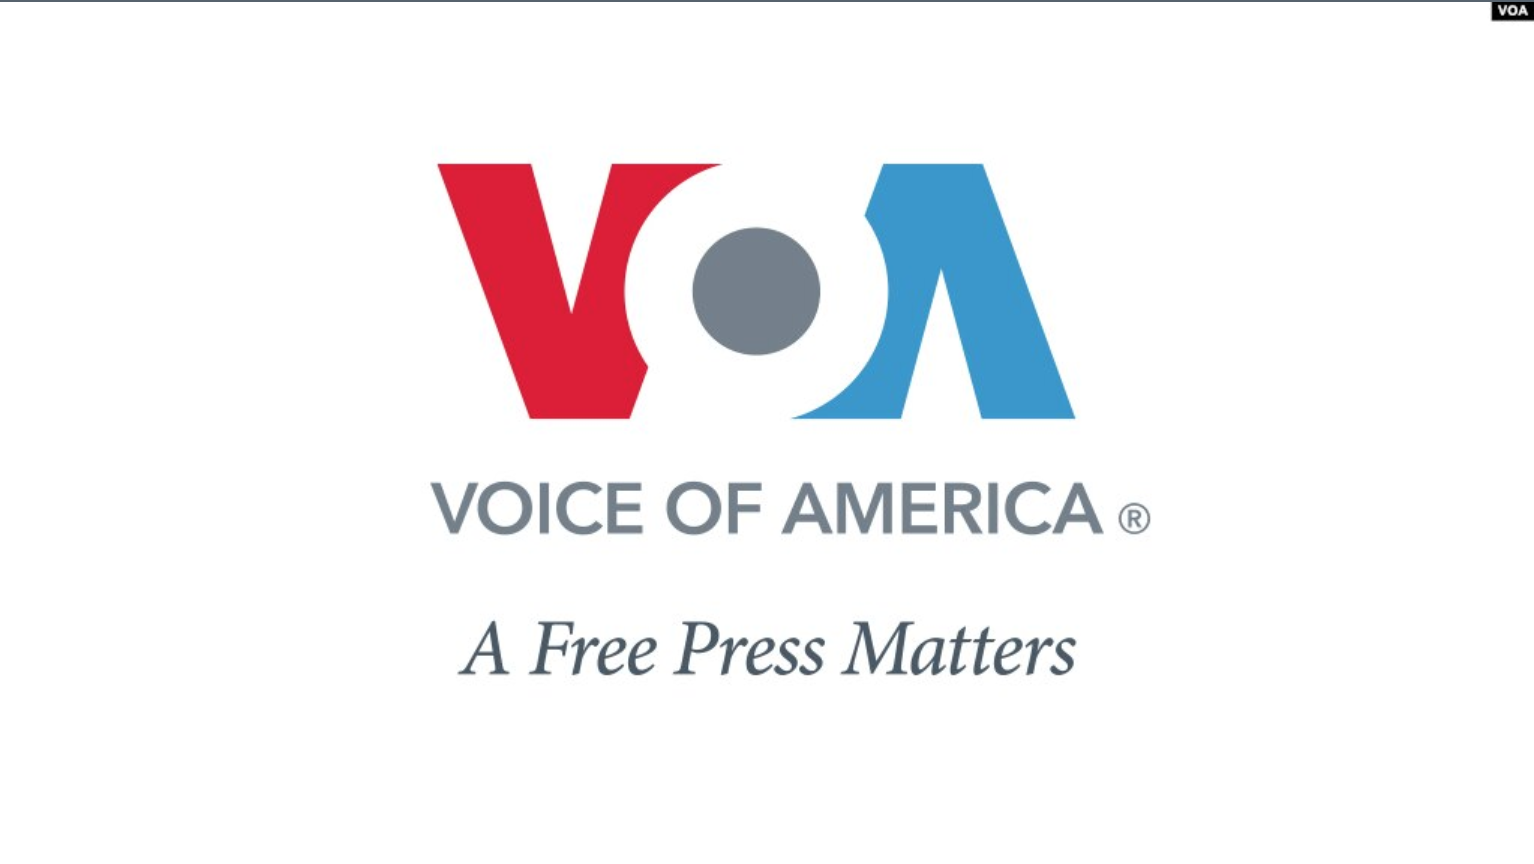 Voice of America denounces Taliban’s order to remove VOA’s programs from TV broadcasts in Afghanistan